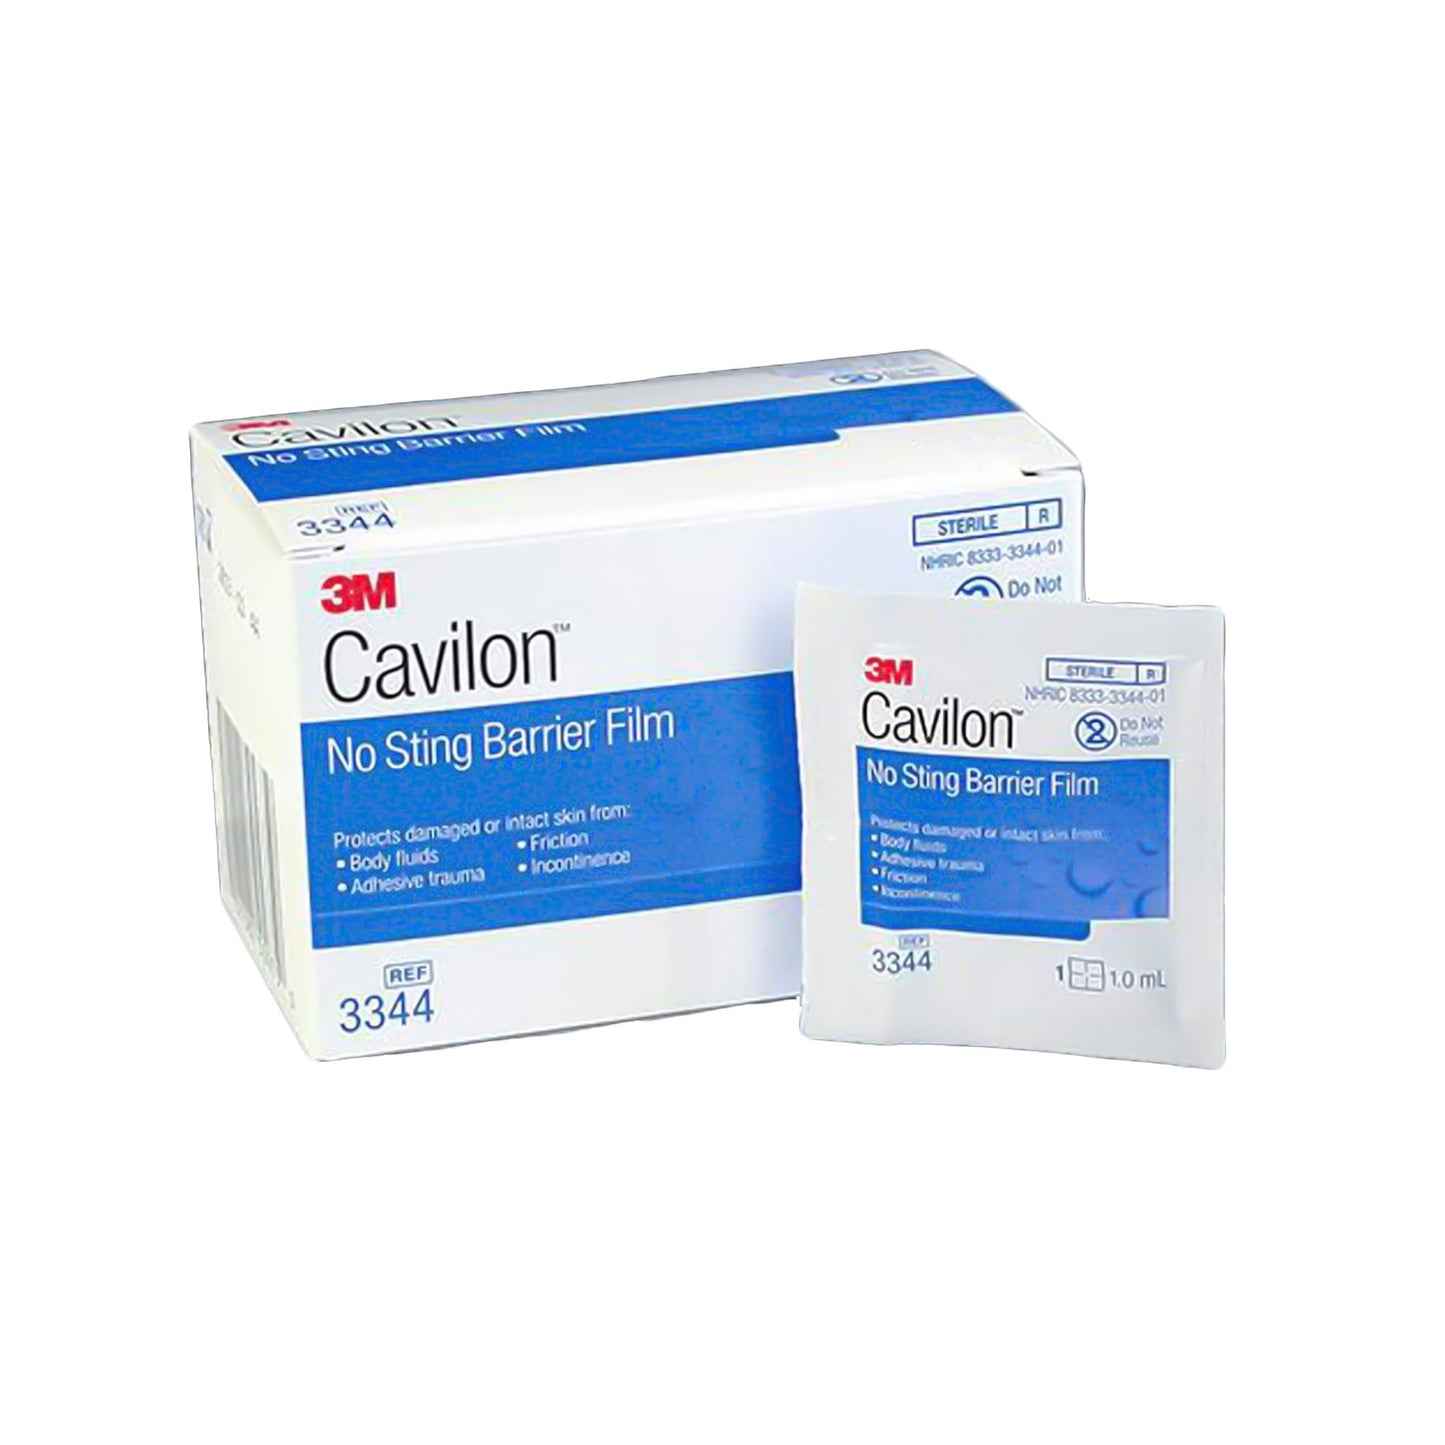 3M Cavilon Barrier Film Wipes, No Sting, Sterile, Single Packet